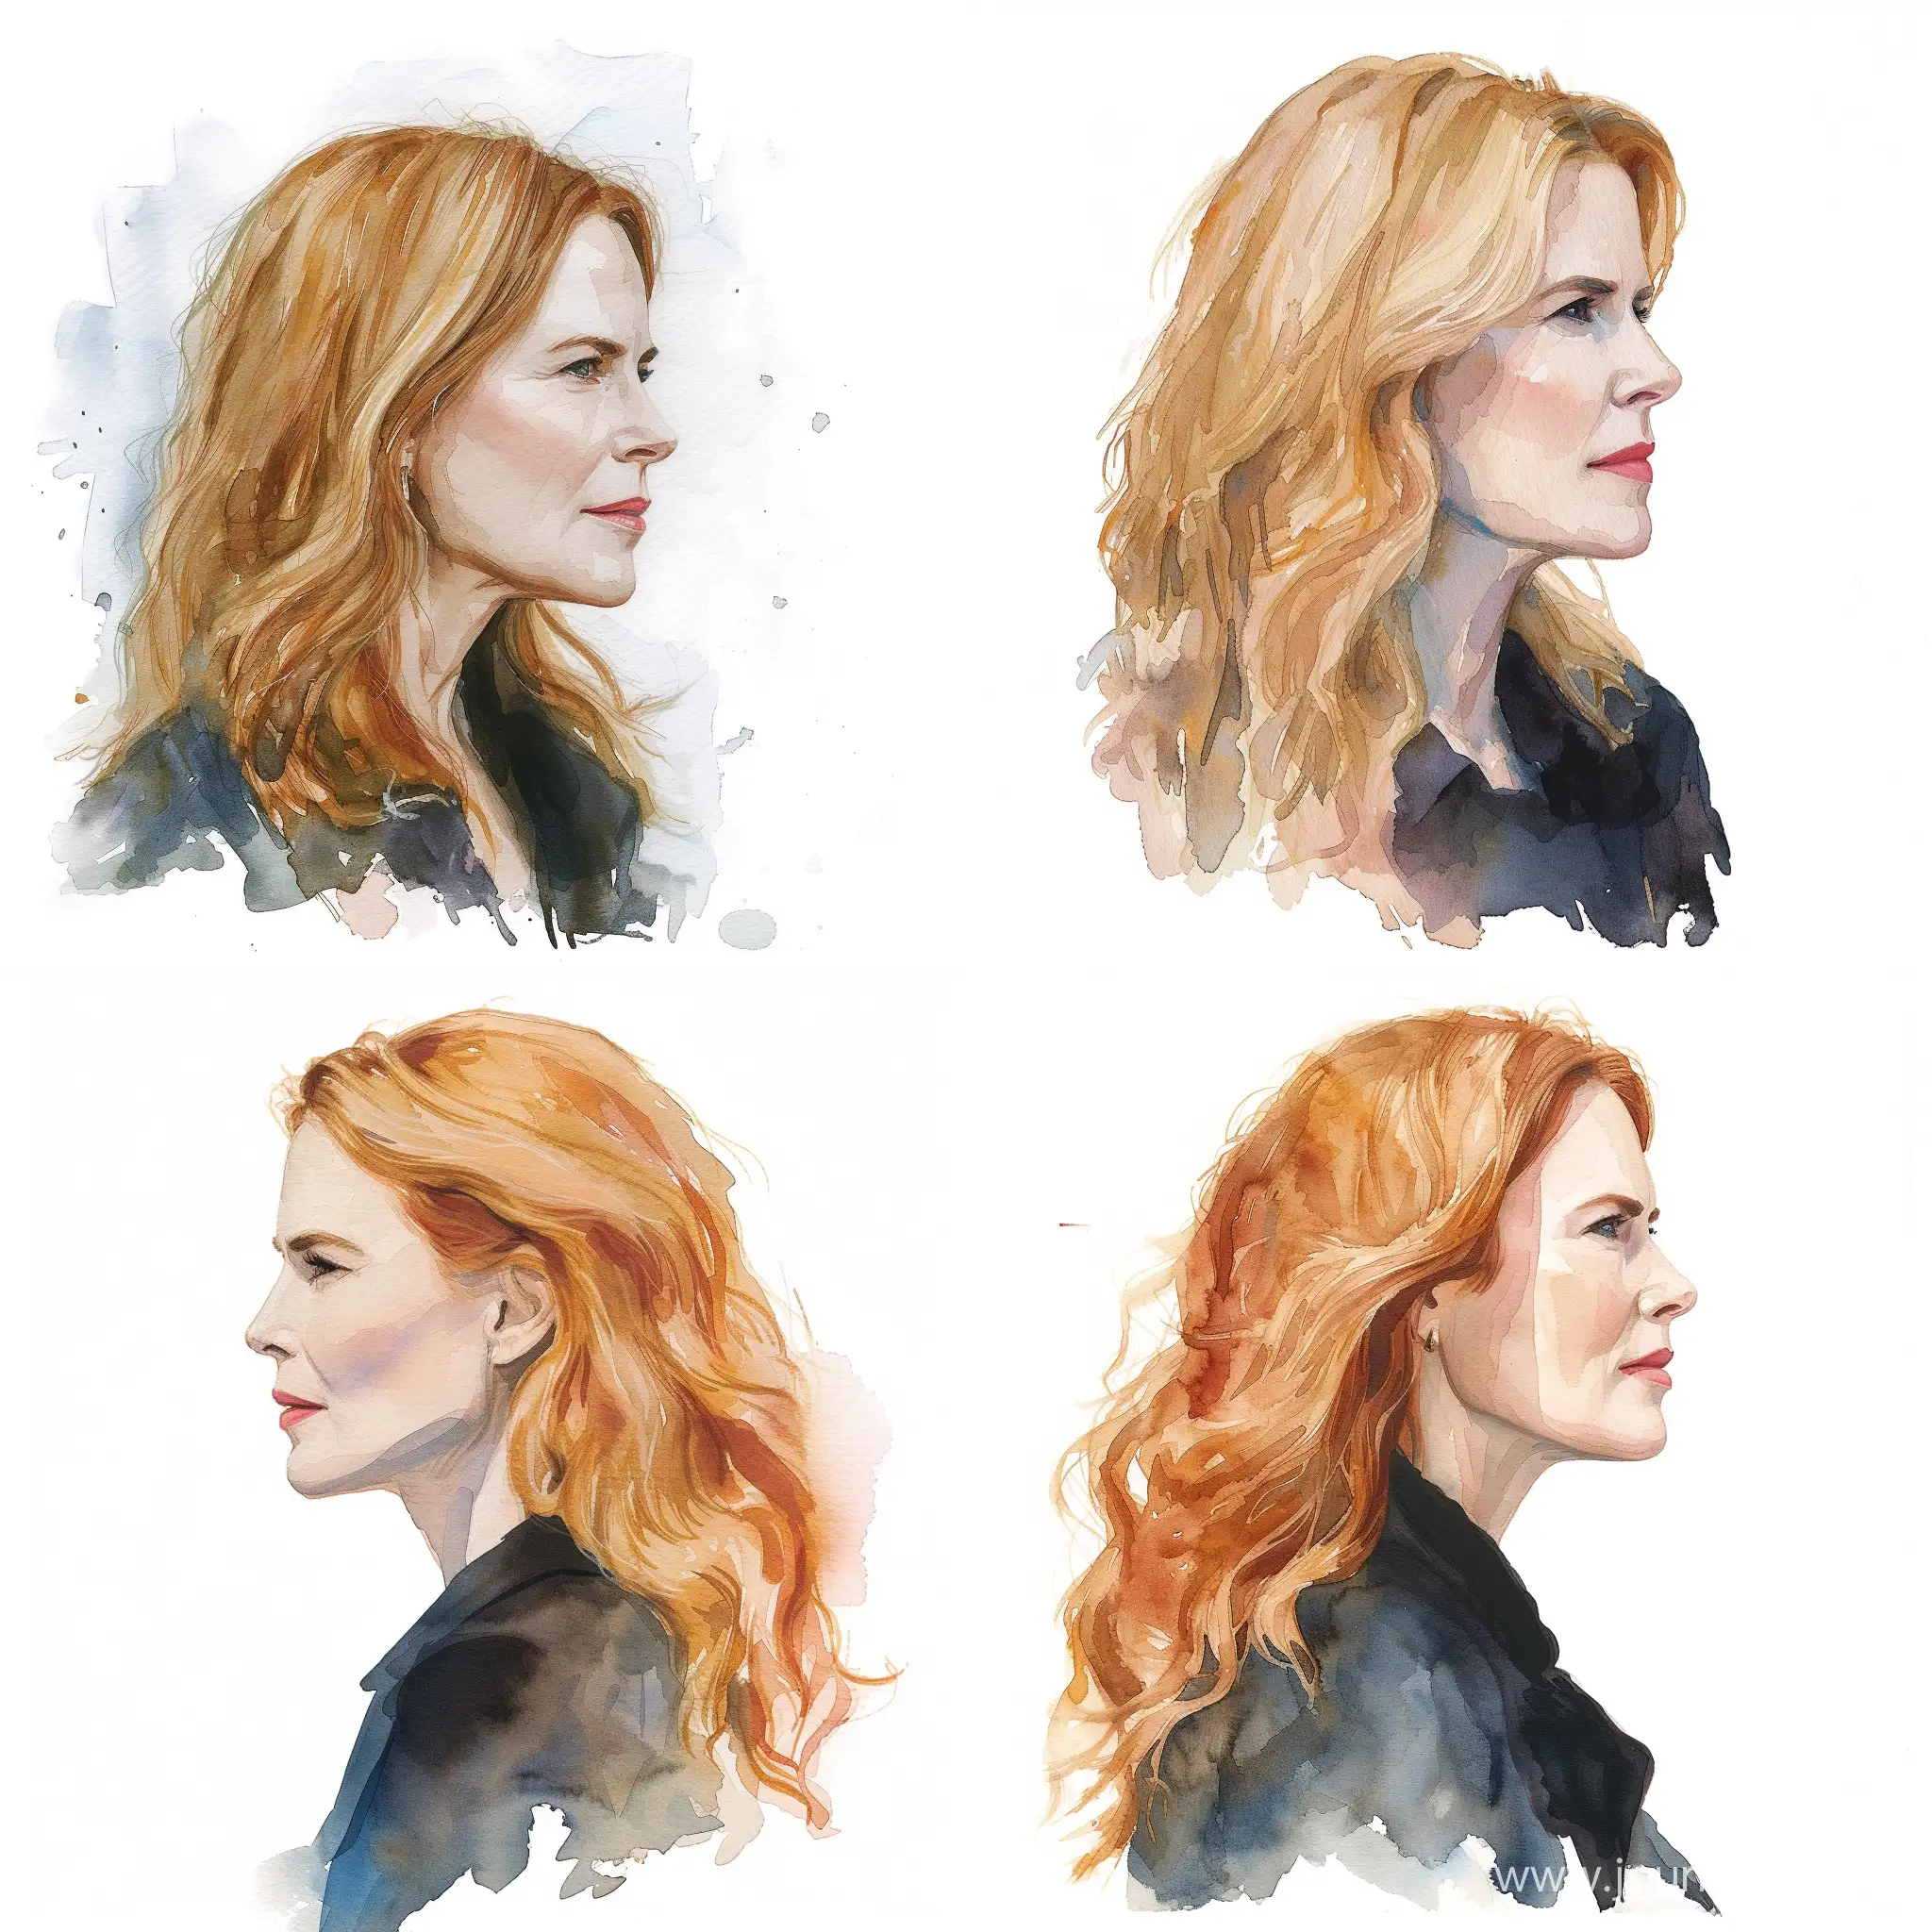 Profile-Portrait-of-Nicole-Kidman-in-Watercolor-Illustration-Style-by-Victoria-Ngai